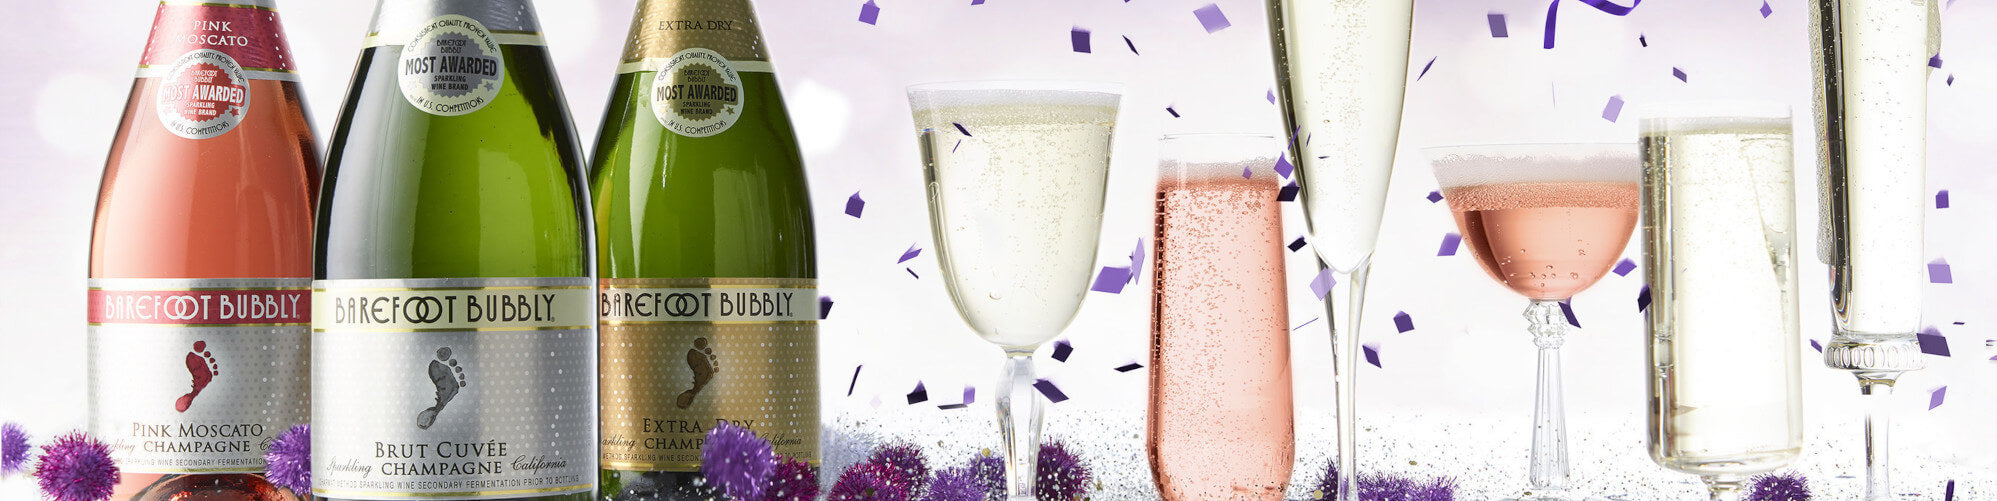 Buy Barefoot Bubbly Online